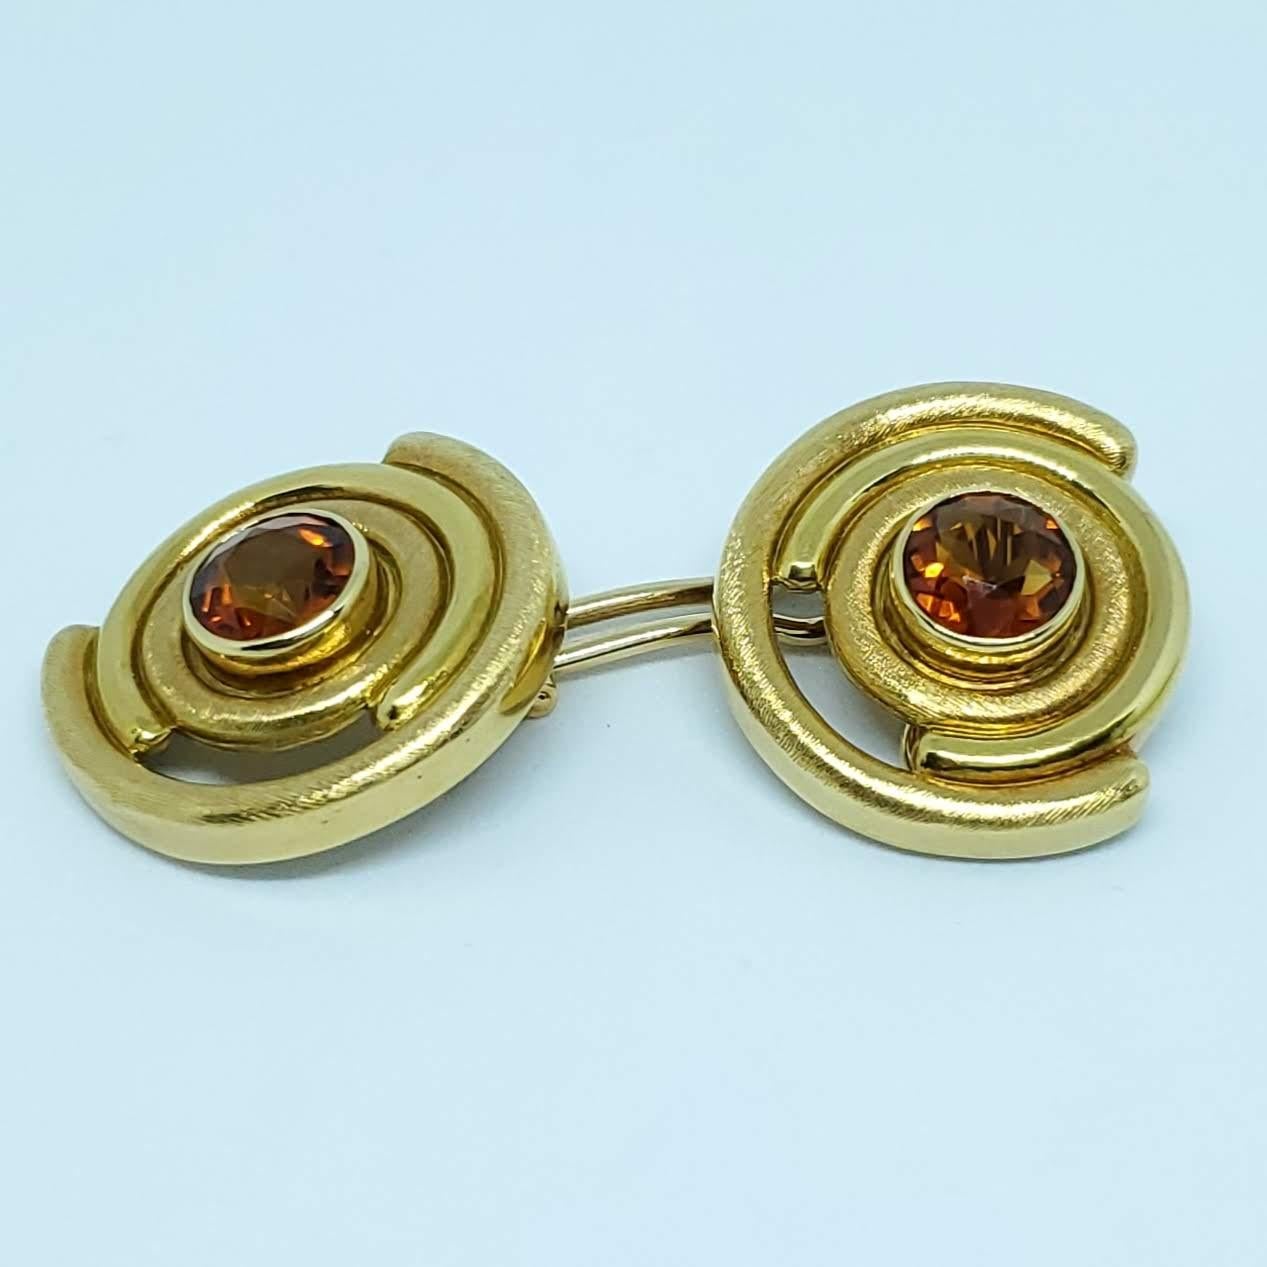 Thanks for taking a look at these Burle Marx Madeira Citrine Earrings. Unfortunately we don't have the exact weights, but we can tell you their measurements. They are 1.10